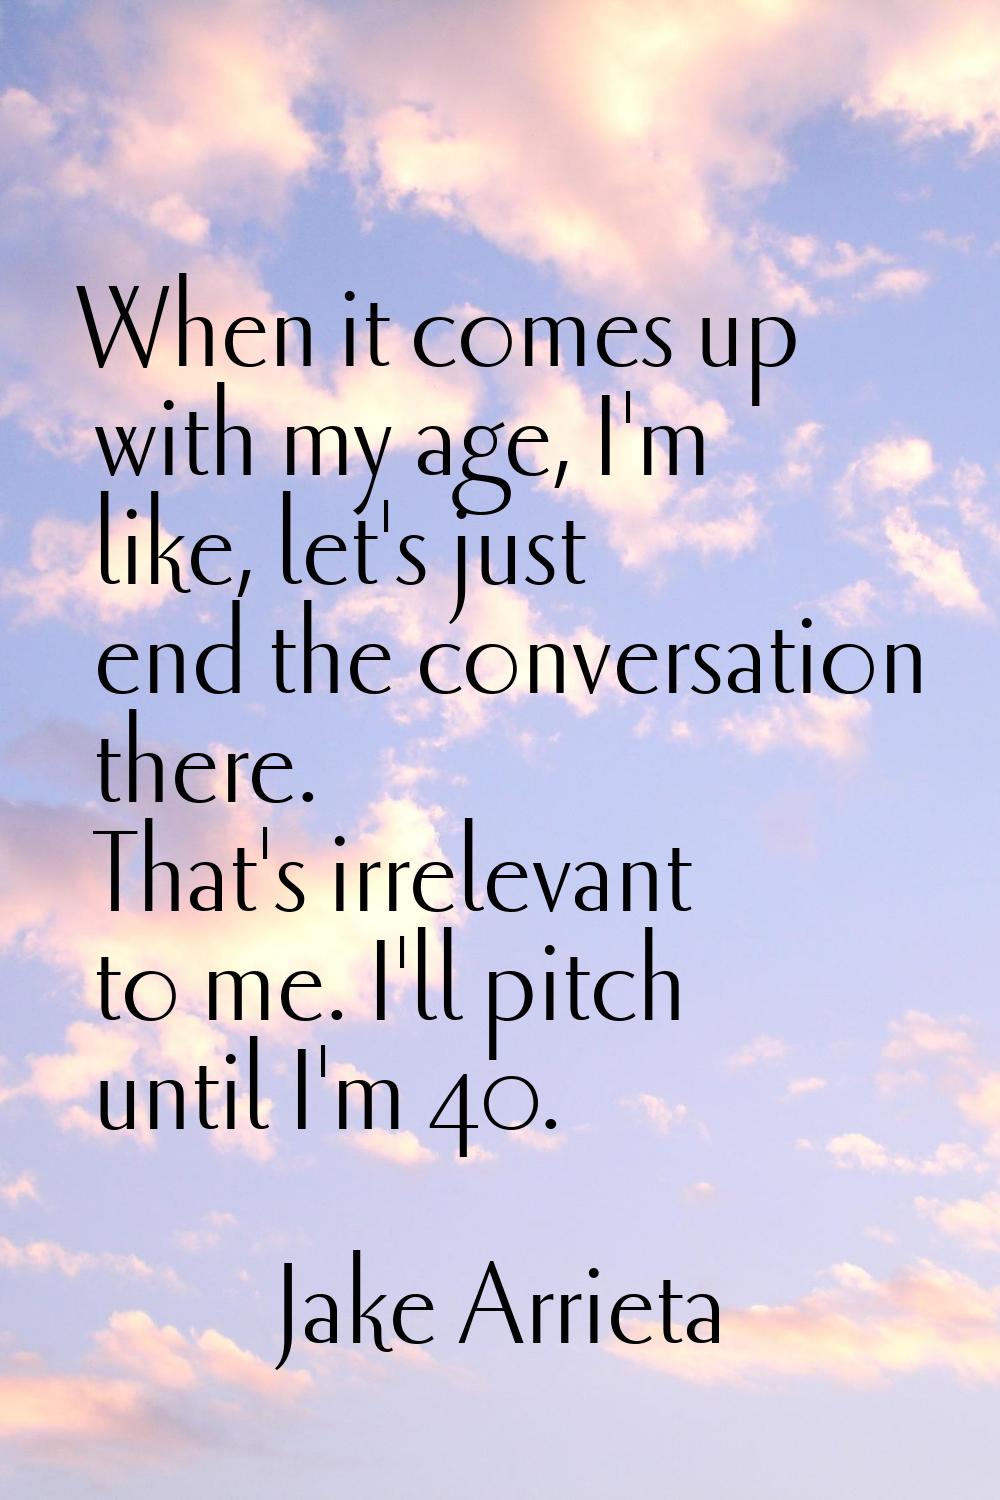 When it comes up with my age, I'm like, let's just end the conversation there. That's irrelevant to